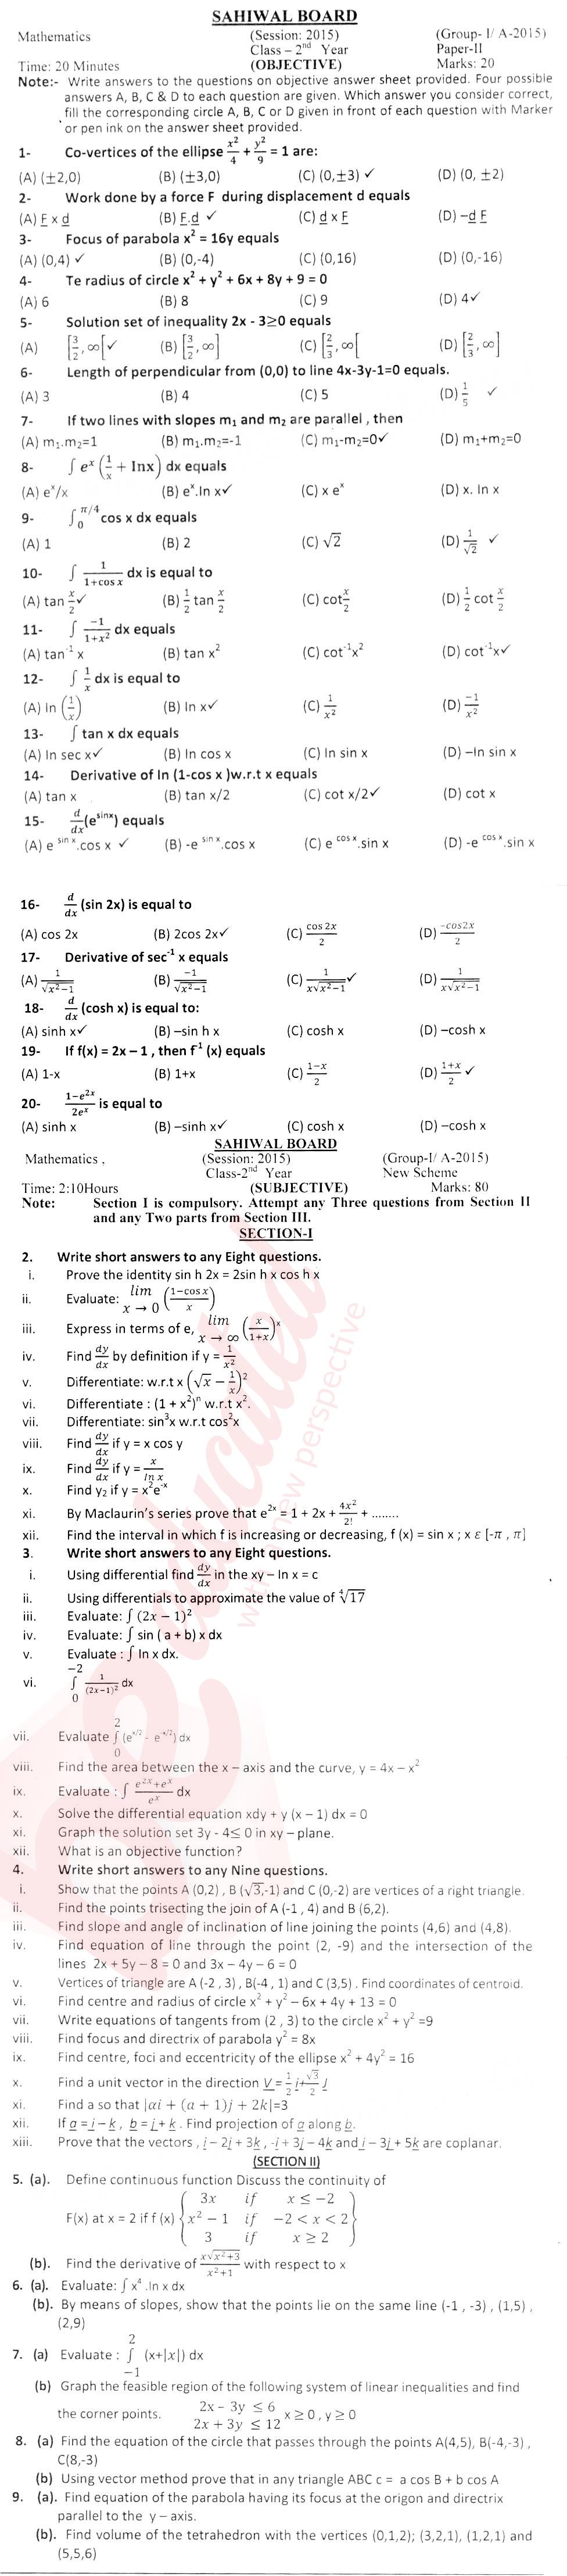 Math 12th class Past Paper Group 1 BISE Sahiwal 2015